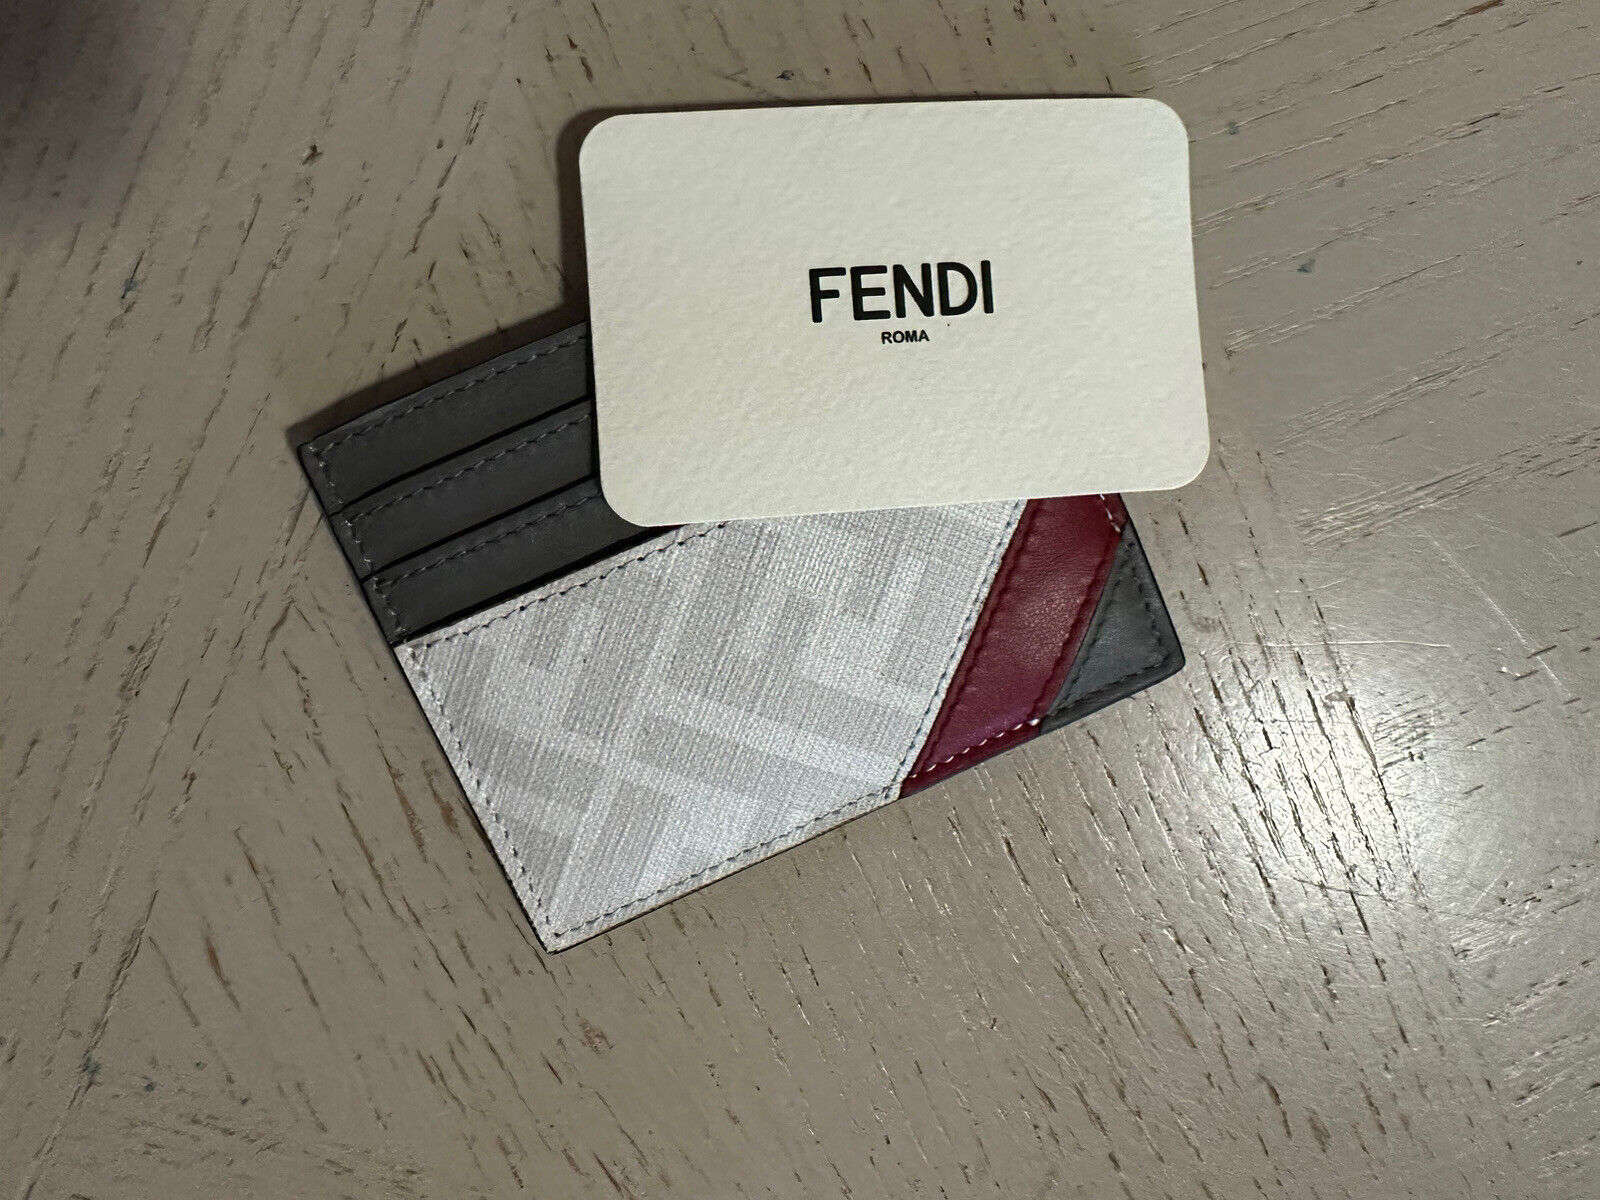 New Fendi Logo Print Leather Card Case Wallet Cream/Red/Gray Italy